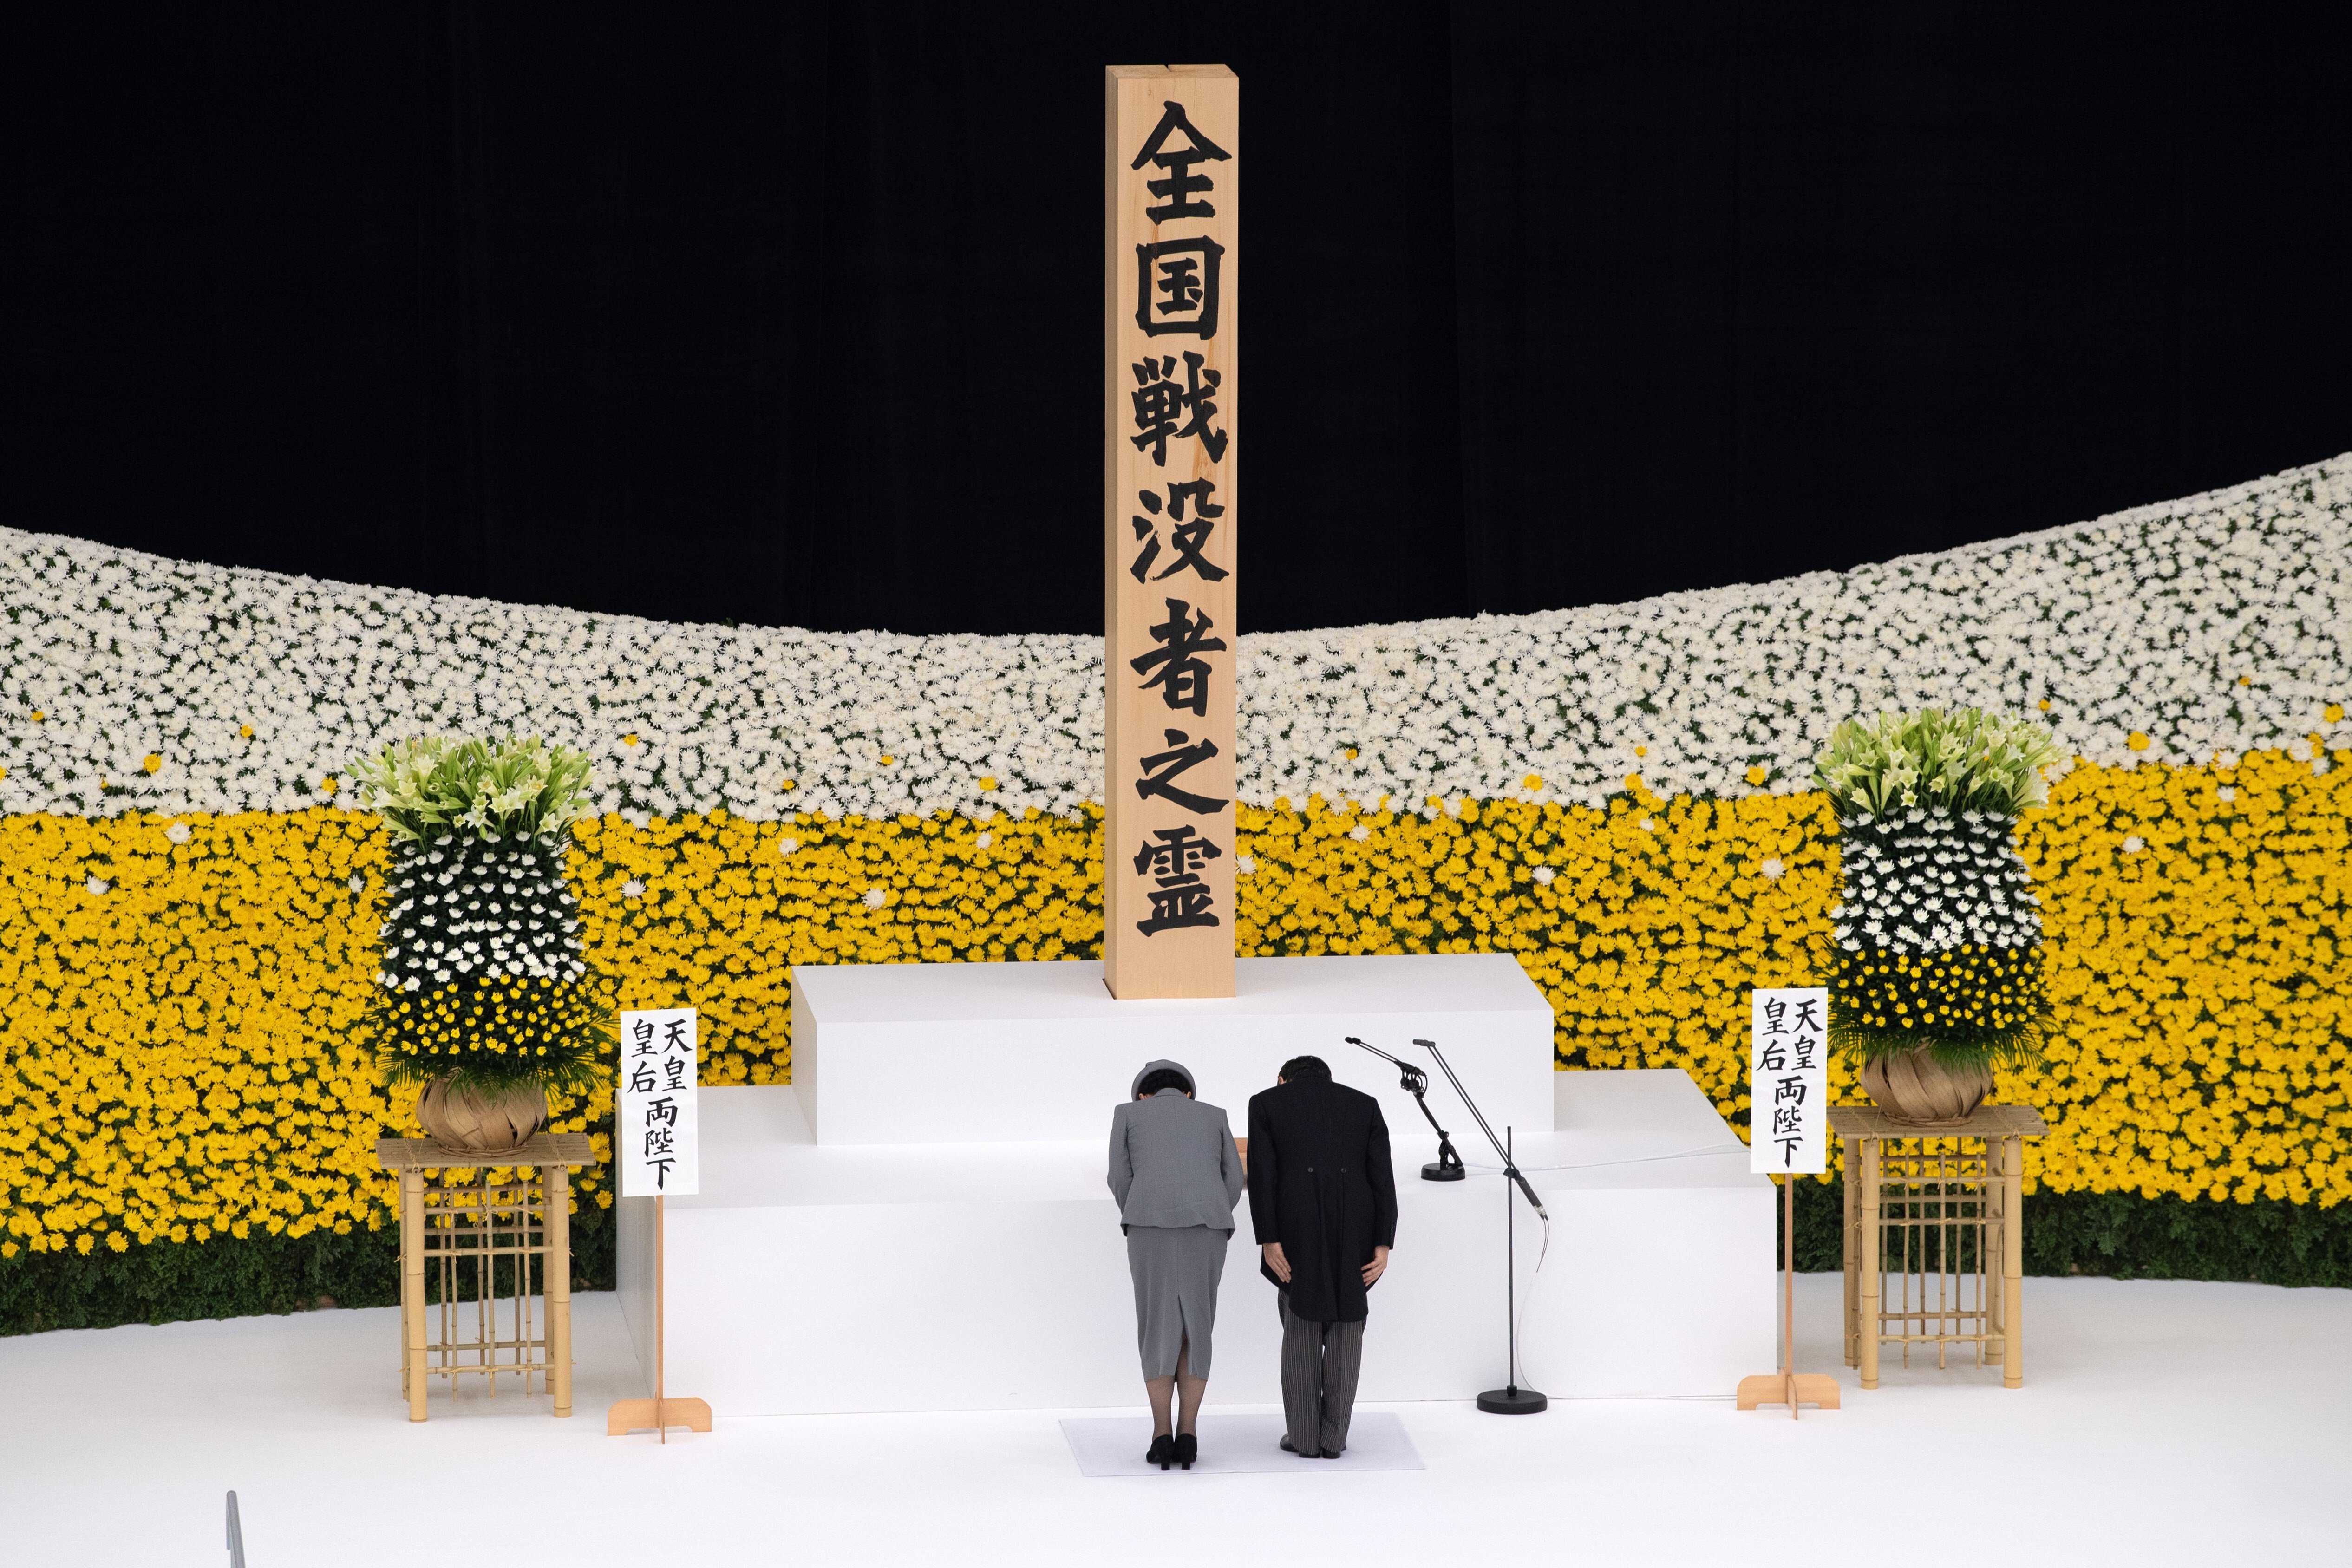 Emperor Naruhito and Empress Masako bow during a memorial service marking the 75th anniversary of Japan’s surrender in the second world war, in Tokyo, on August 15. Photo: Bloomberg